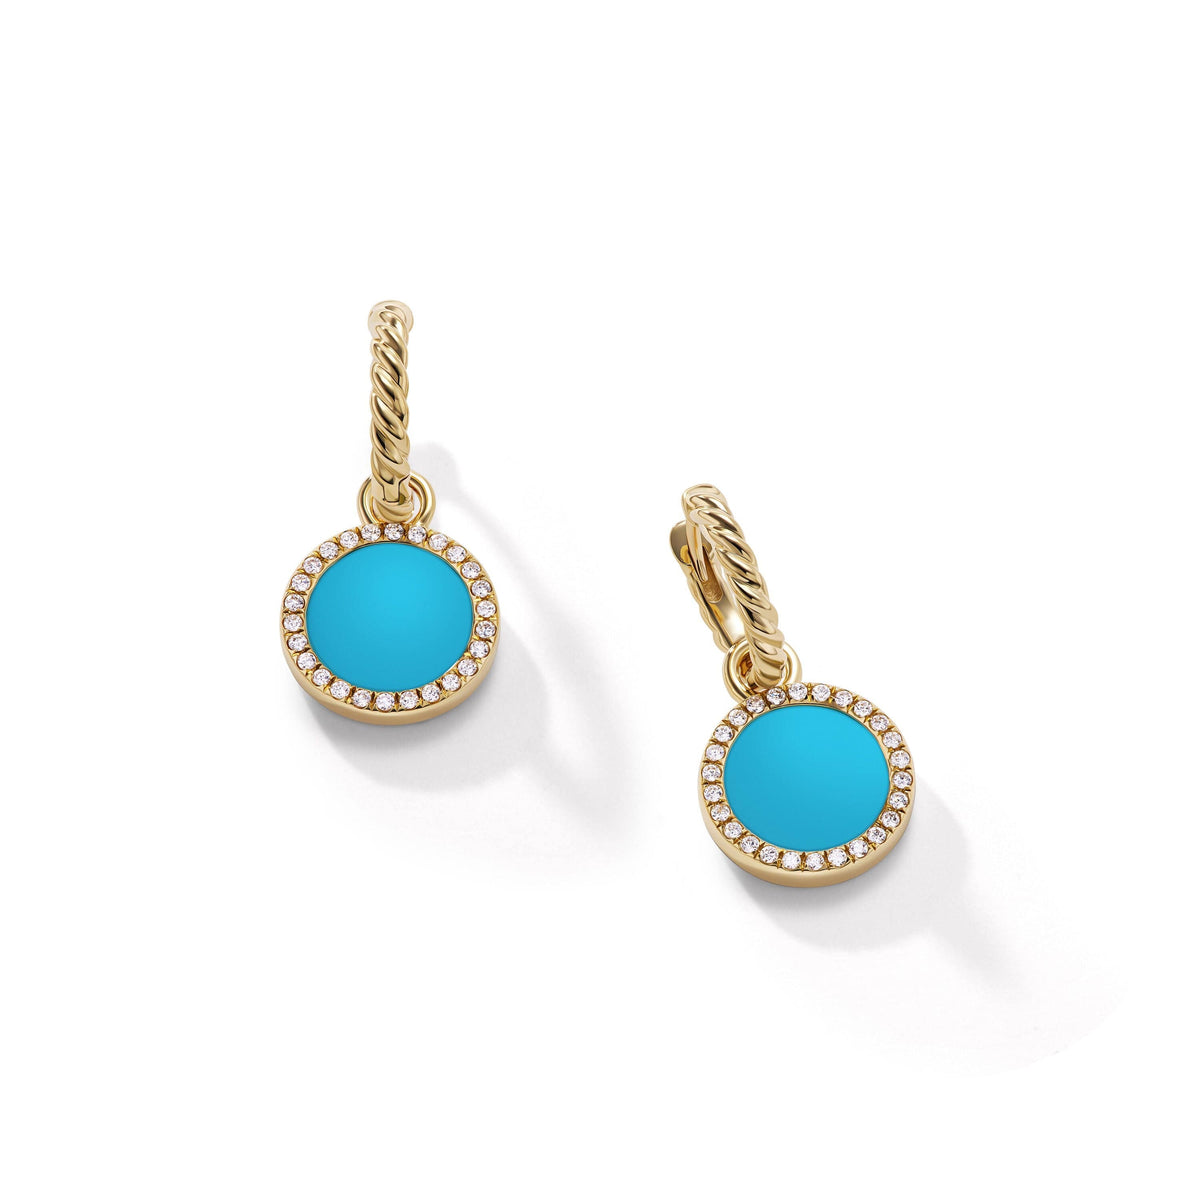 Petite DY Elements® Drop Earrings in 18K Yellow Gold with Turquoise and Pavé Diamonds